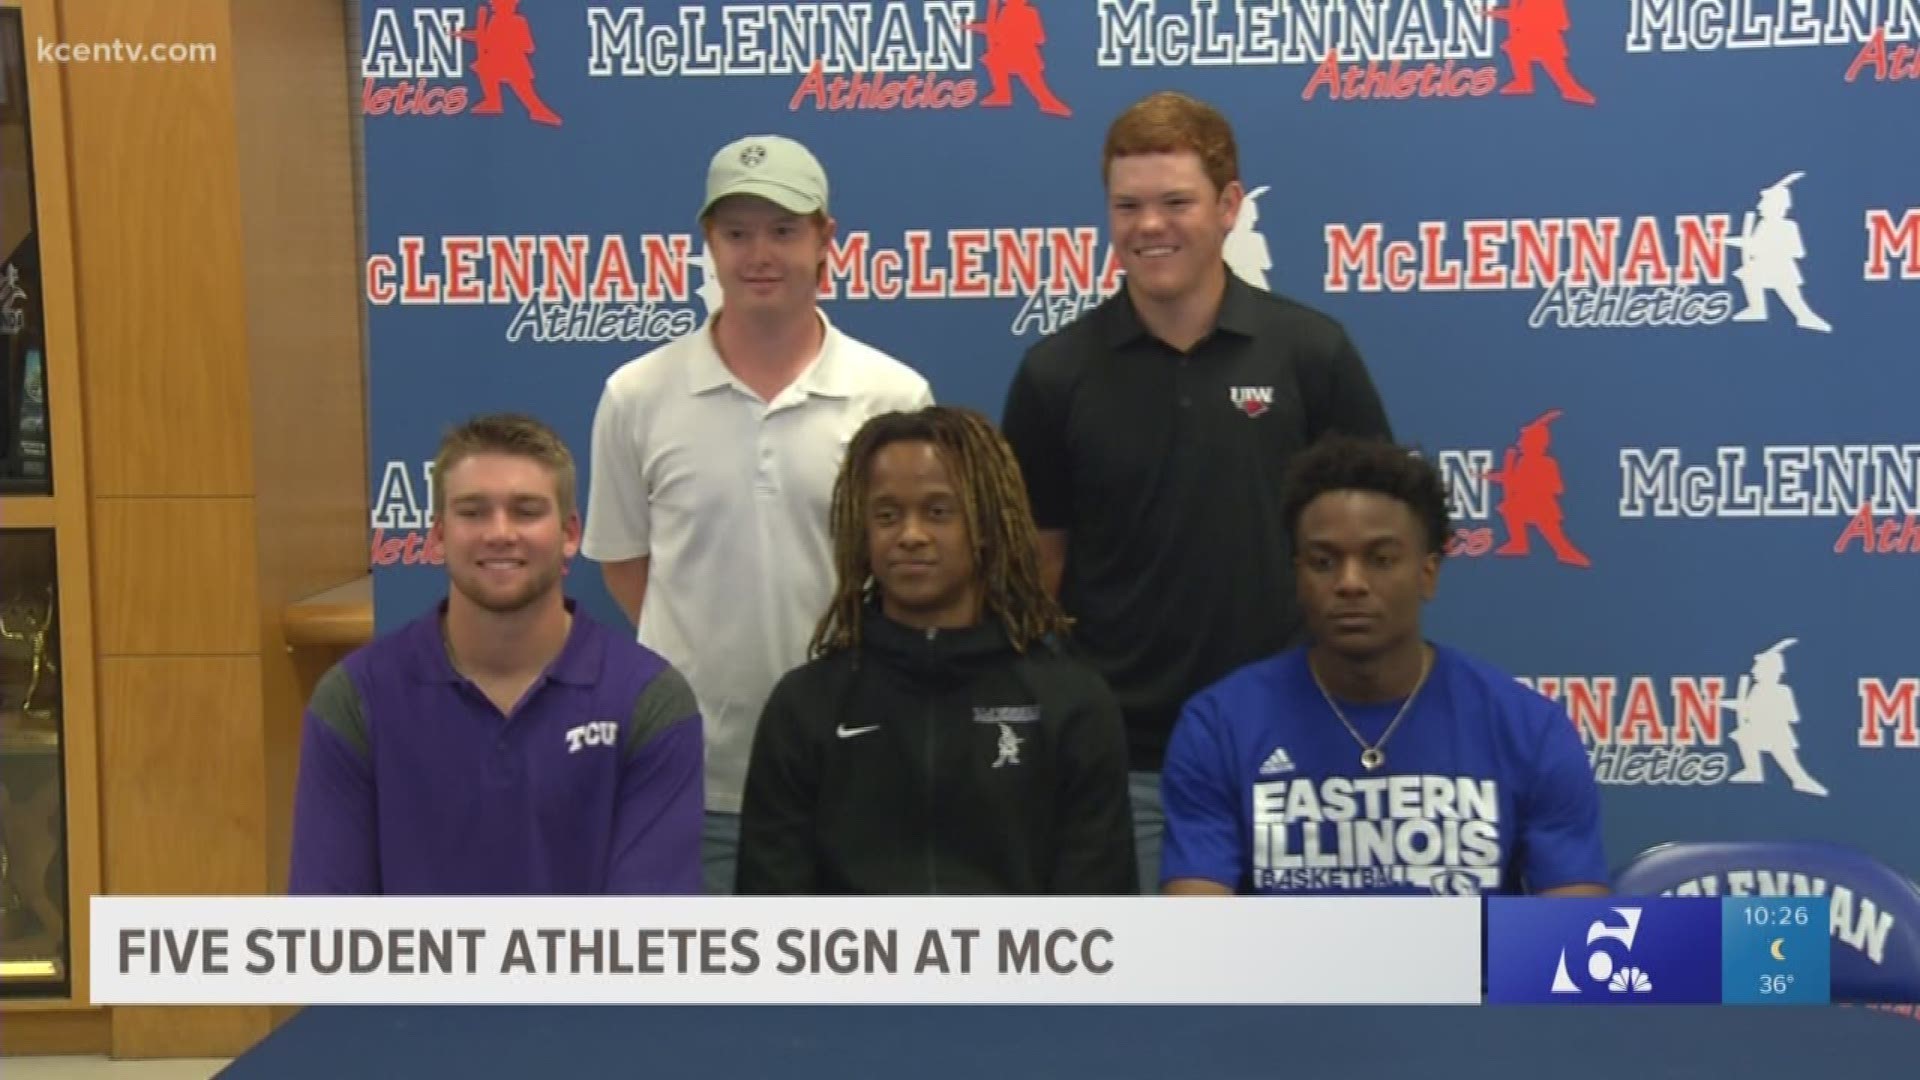 Five student athletes sign at MCC